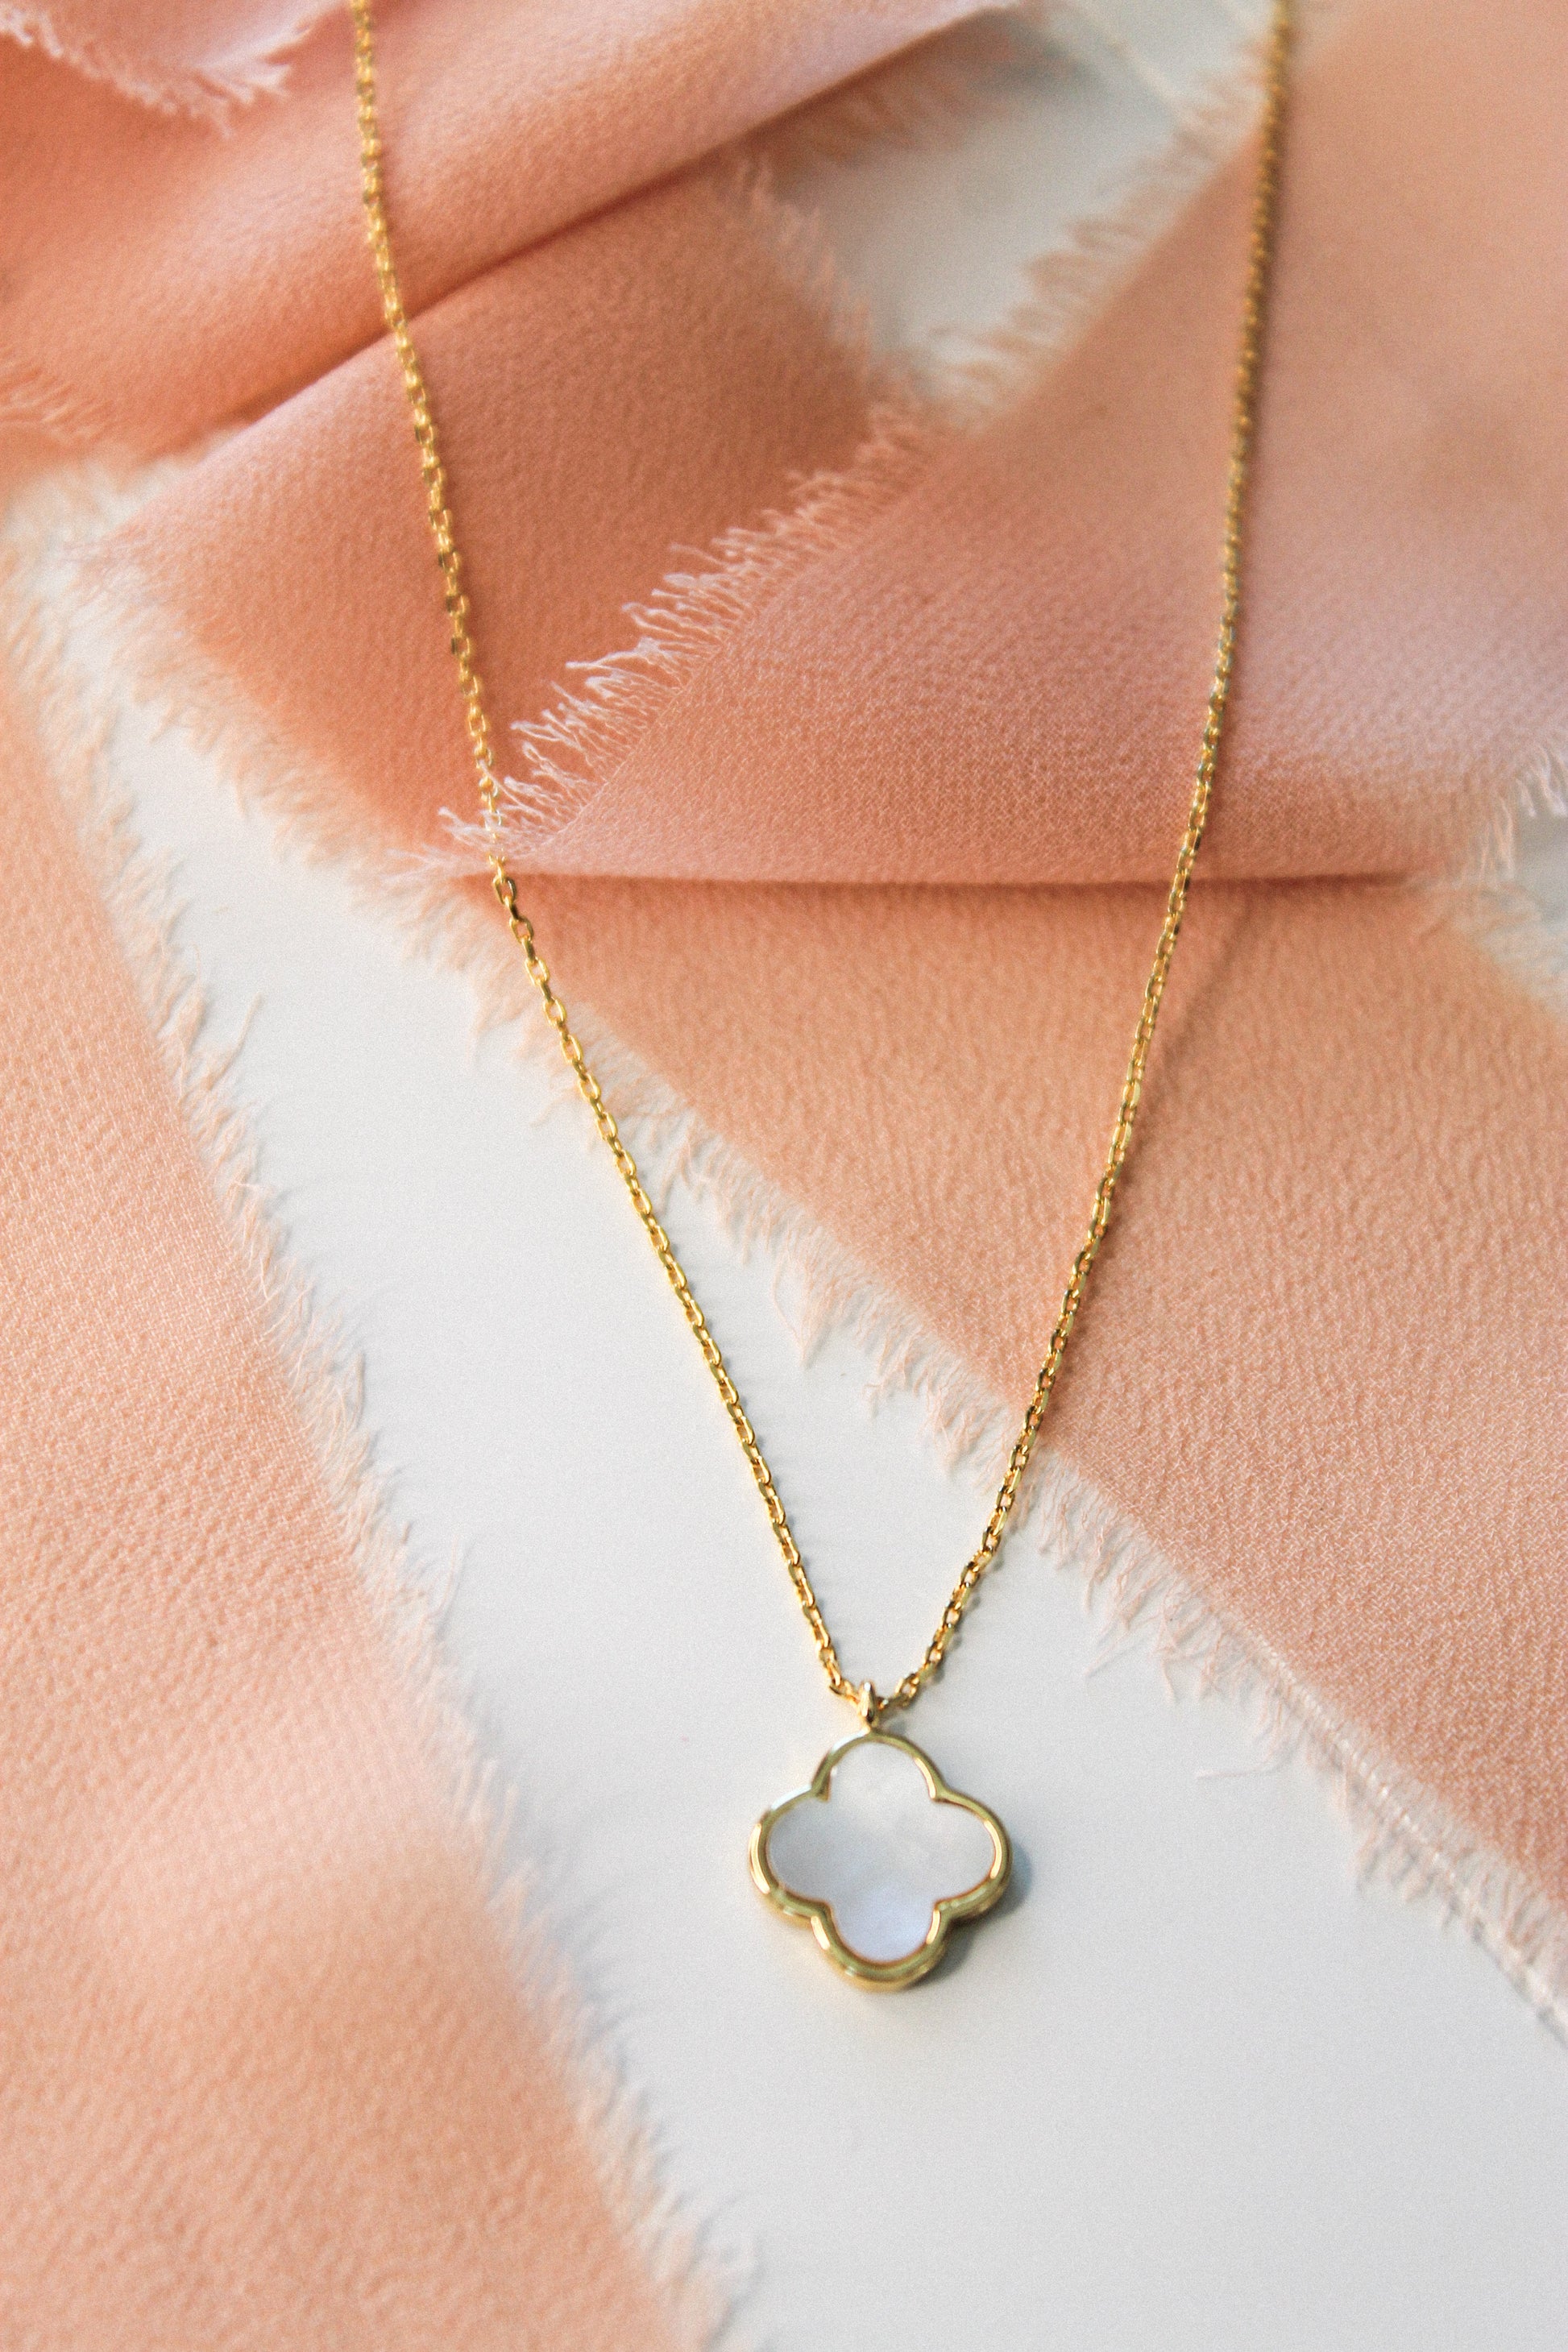 Lucky Clover Necklace For Women Girls, 18K Gold Plated Cute Fashion Simple  Girls Titanium Steel Hypoallergenic Pendant - Walmart.com